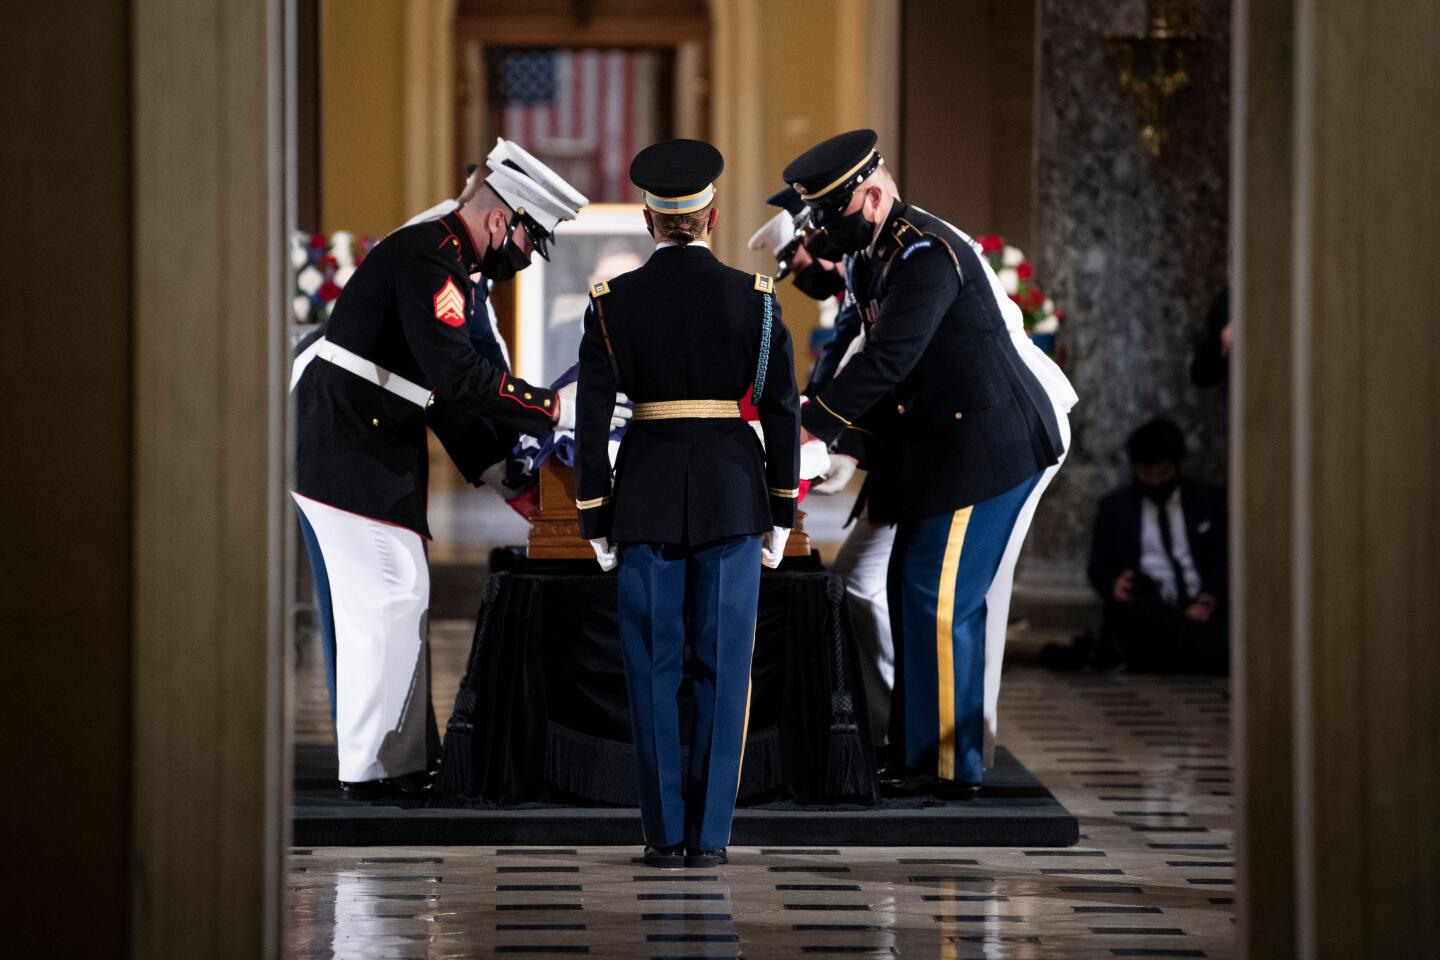 Honor guard places the casket of Justice Ruth Bader Ginsburg in Statuary Hall of the U.S. Capitol to lie in state.